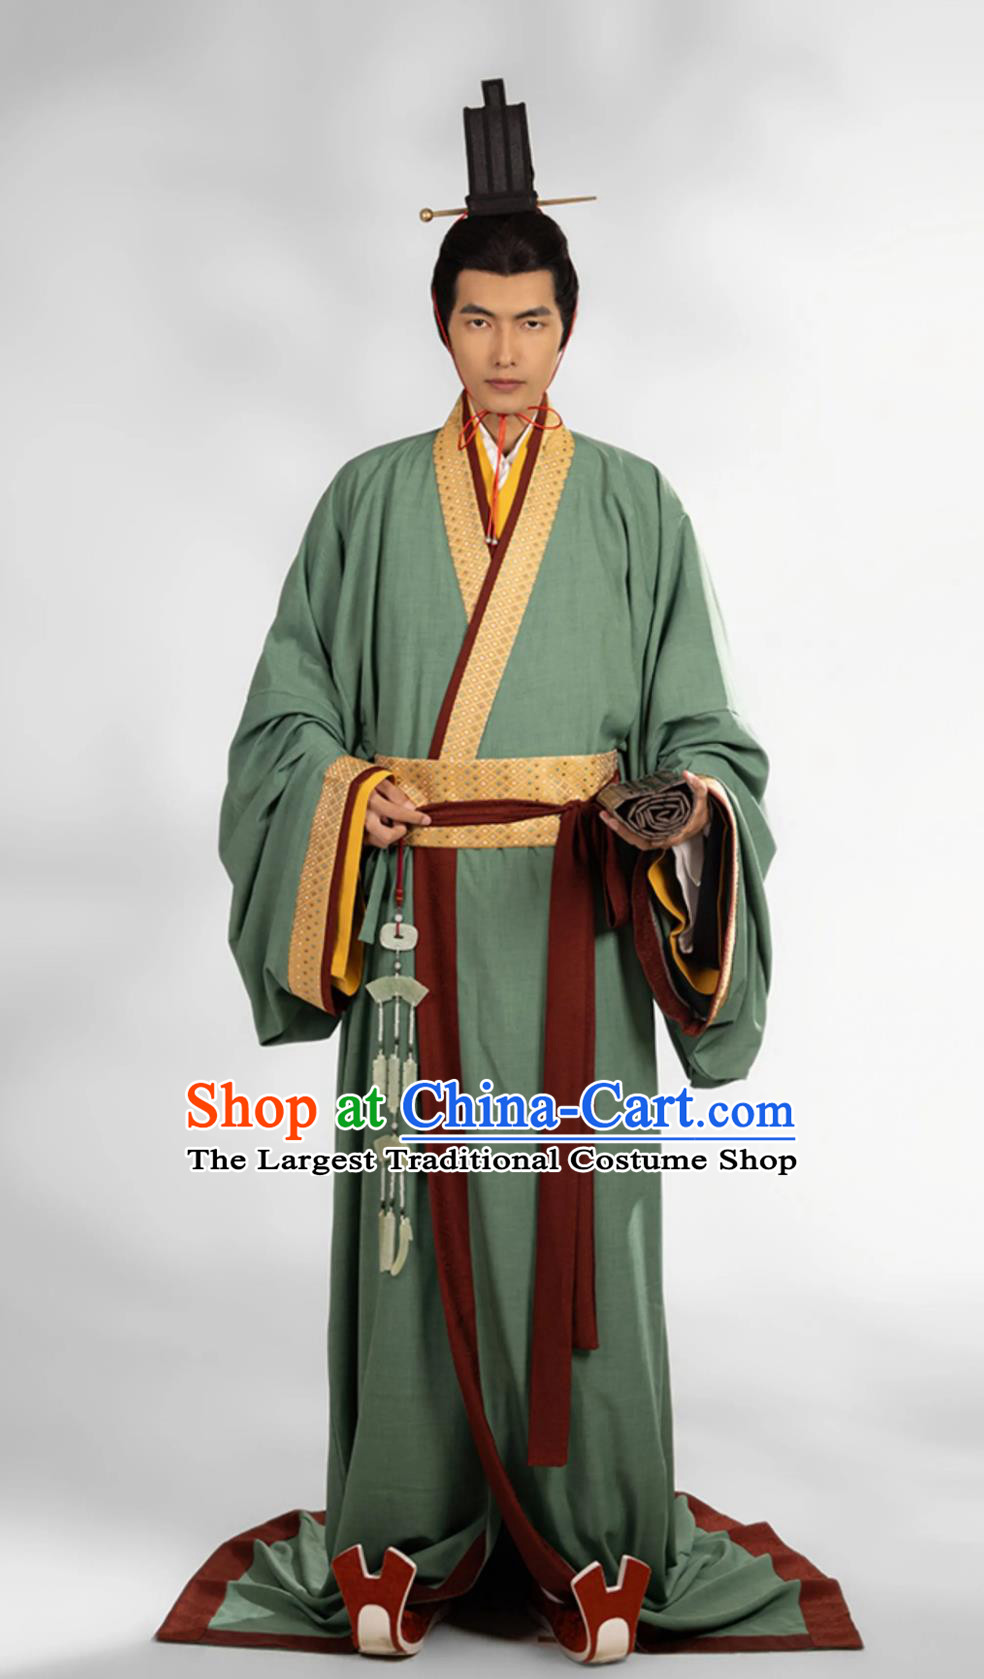 China Travel Photography Costume Ancient Chinese the Warring States Period Prince Clothing Traditional Mens Hanfu Robe